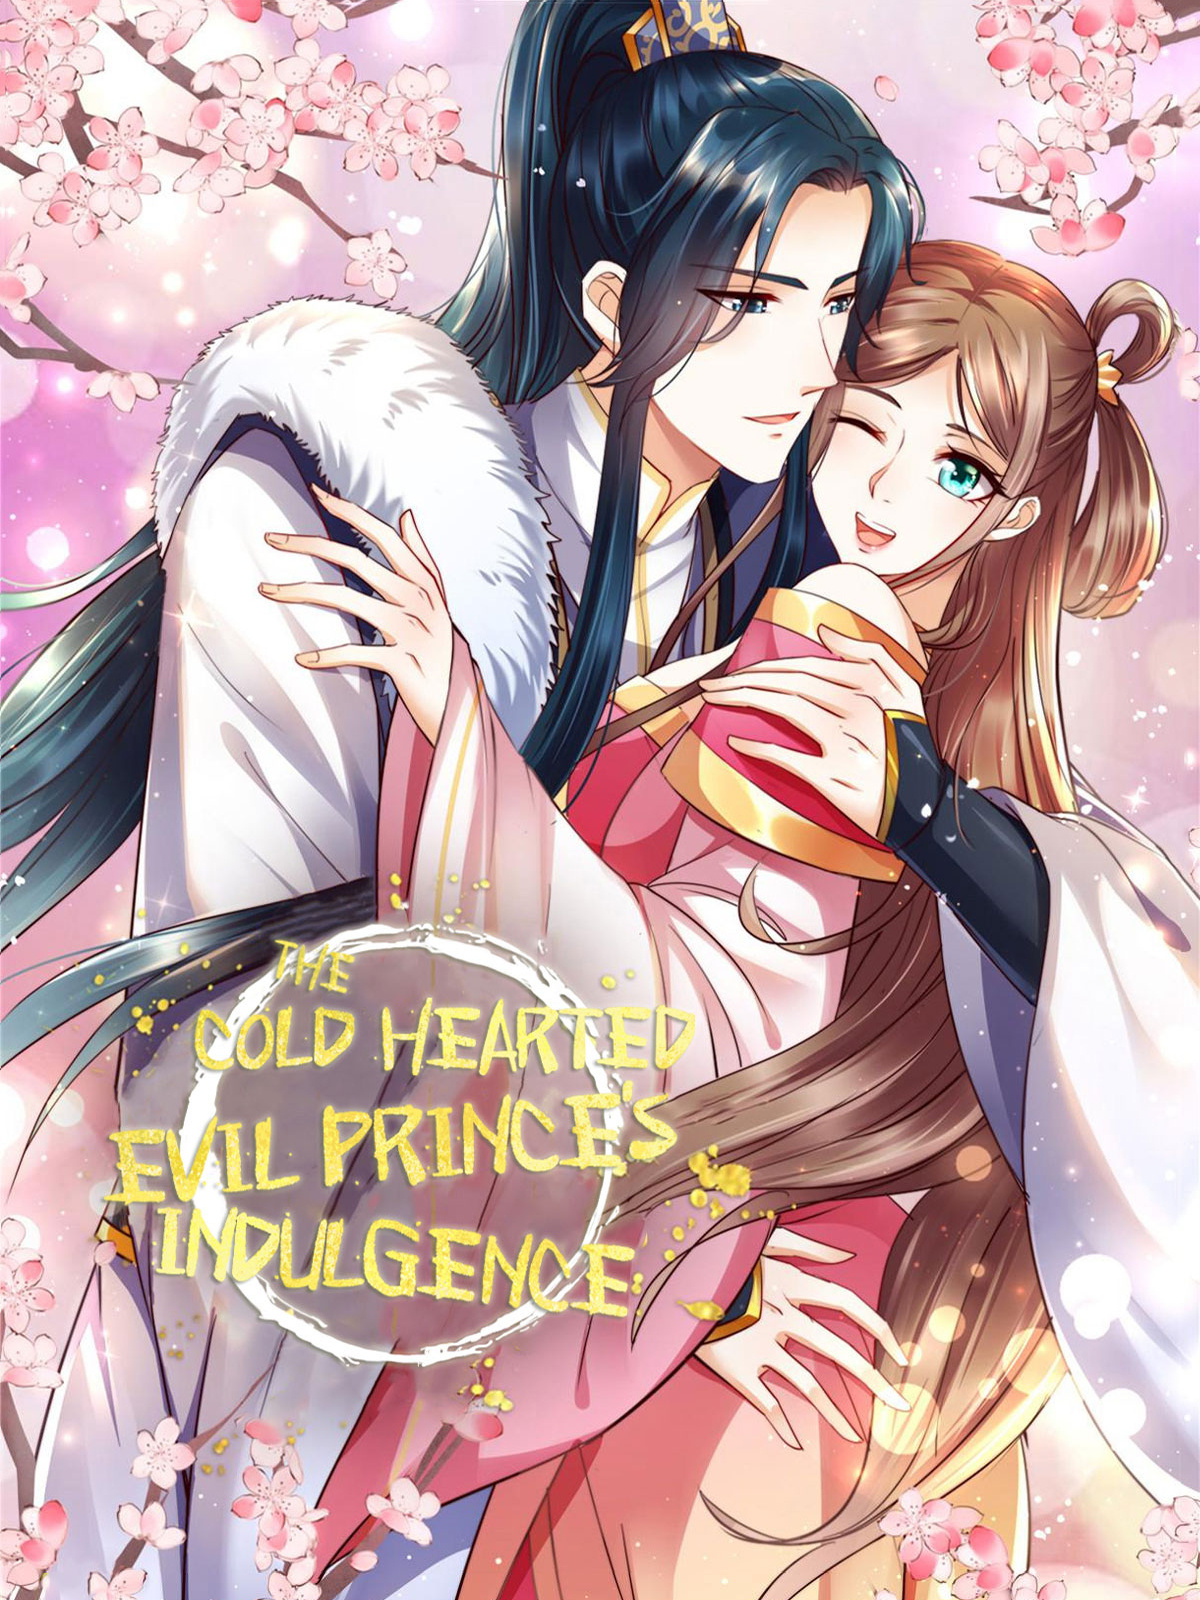 The Cold-Hearted Evil Prince's Indulgence 140